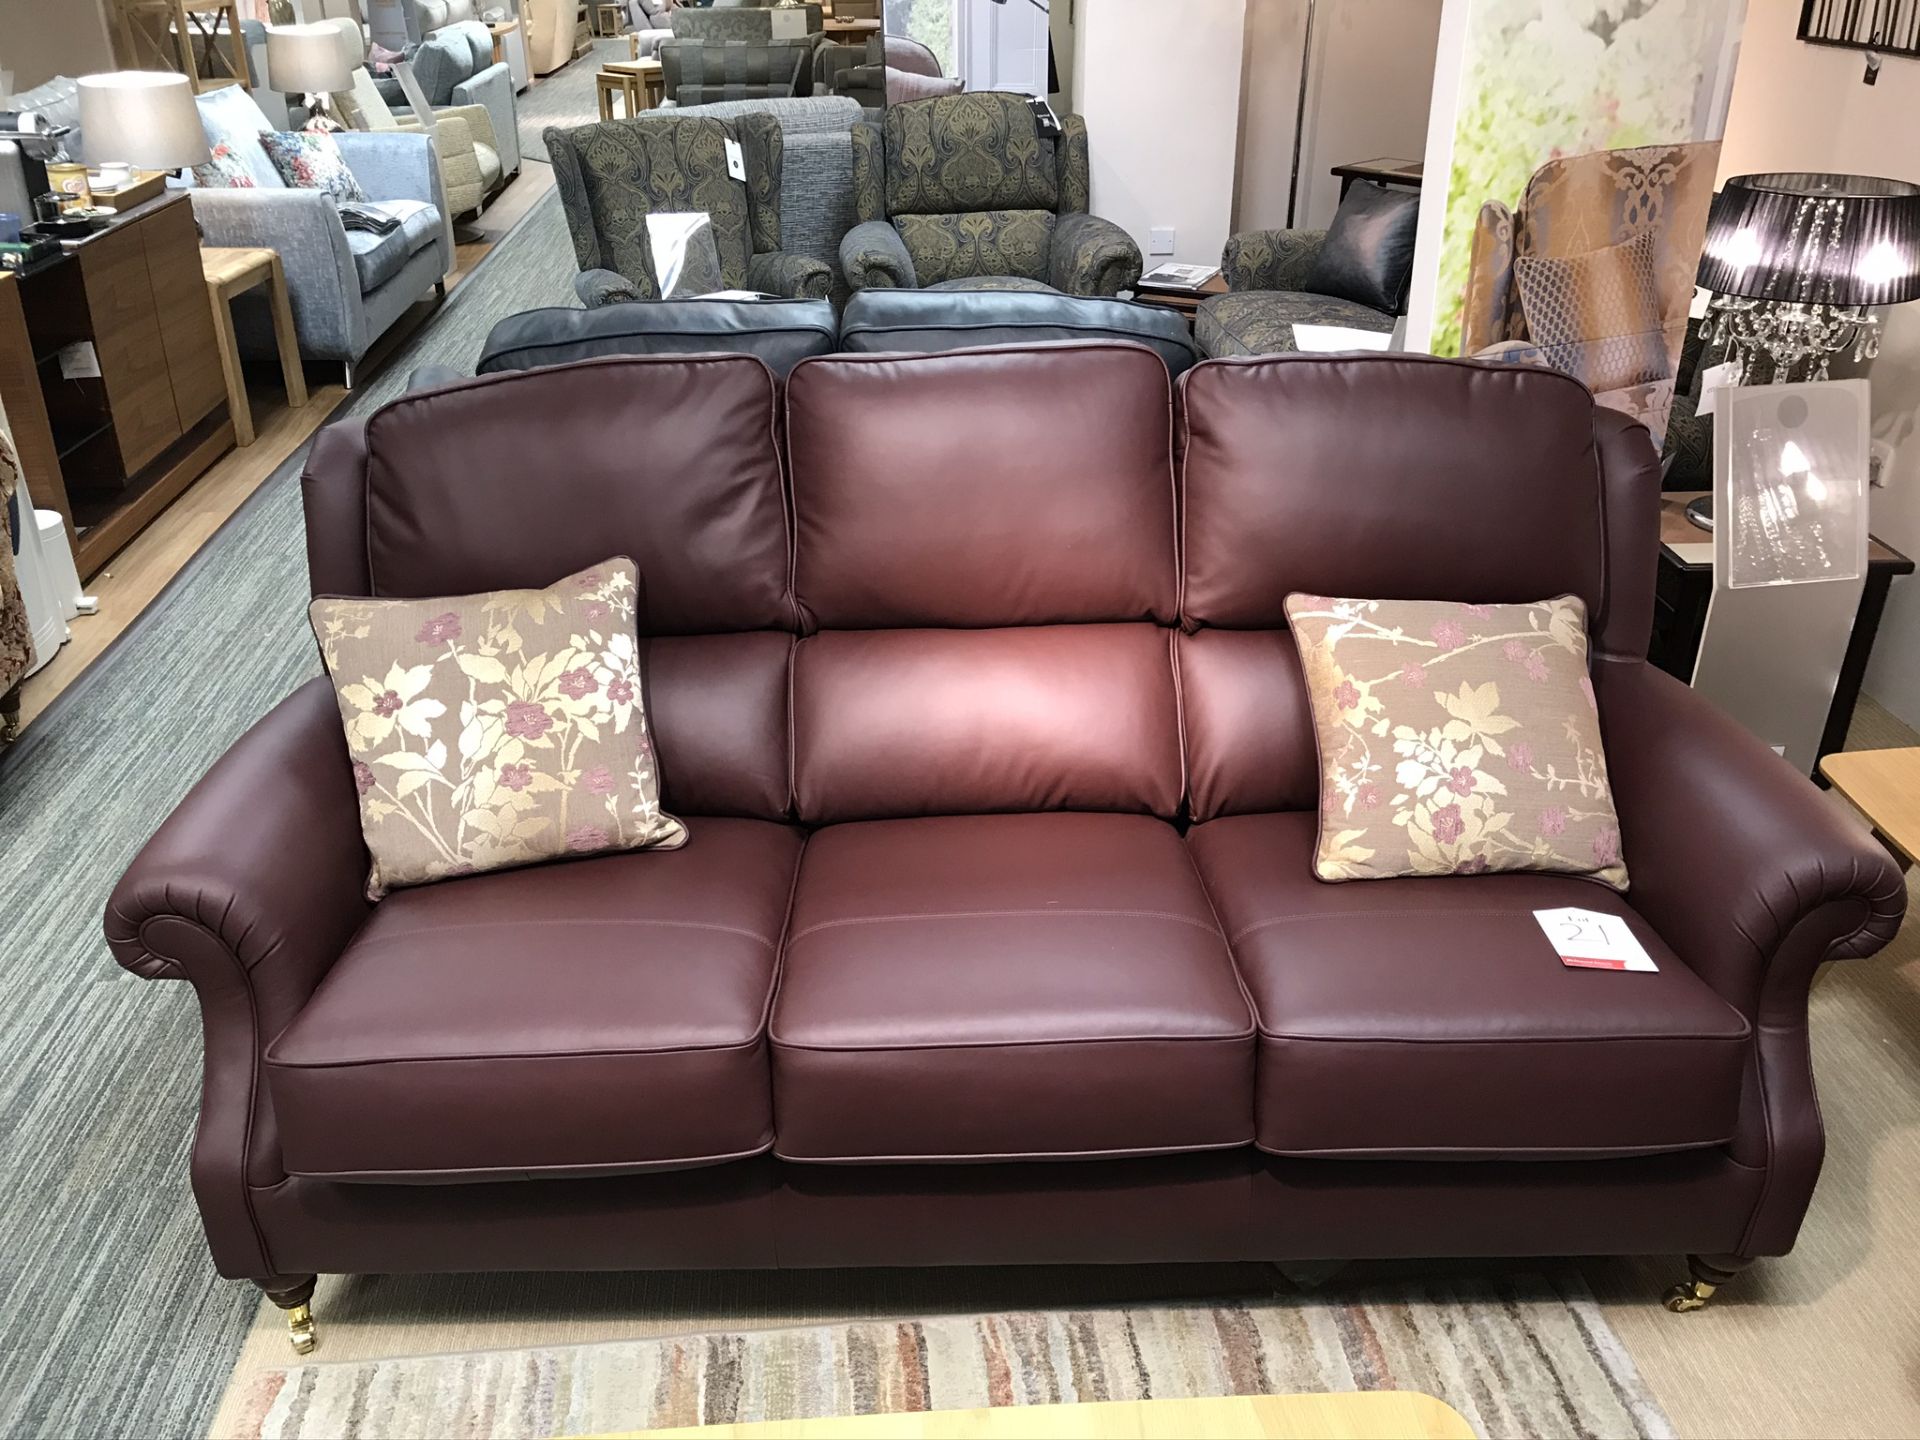 Ex Display Parker Knoll Oakham 3 Seater Sofa & Armchair - Como Conker Leather - Foam Seats - RRP£5,4 - Image 2 of 4